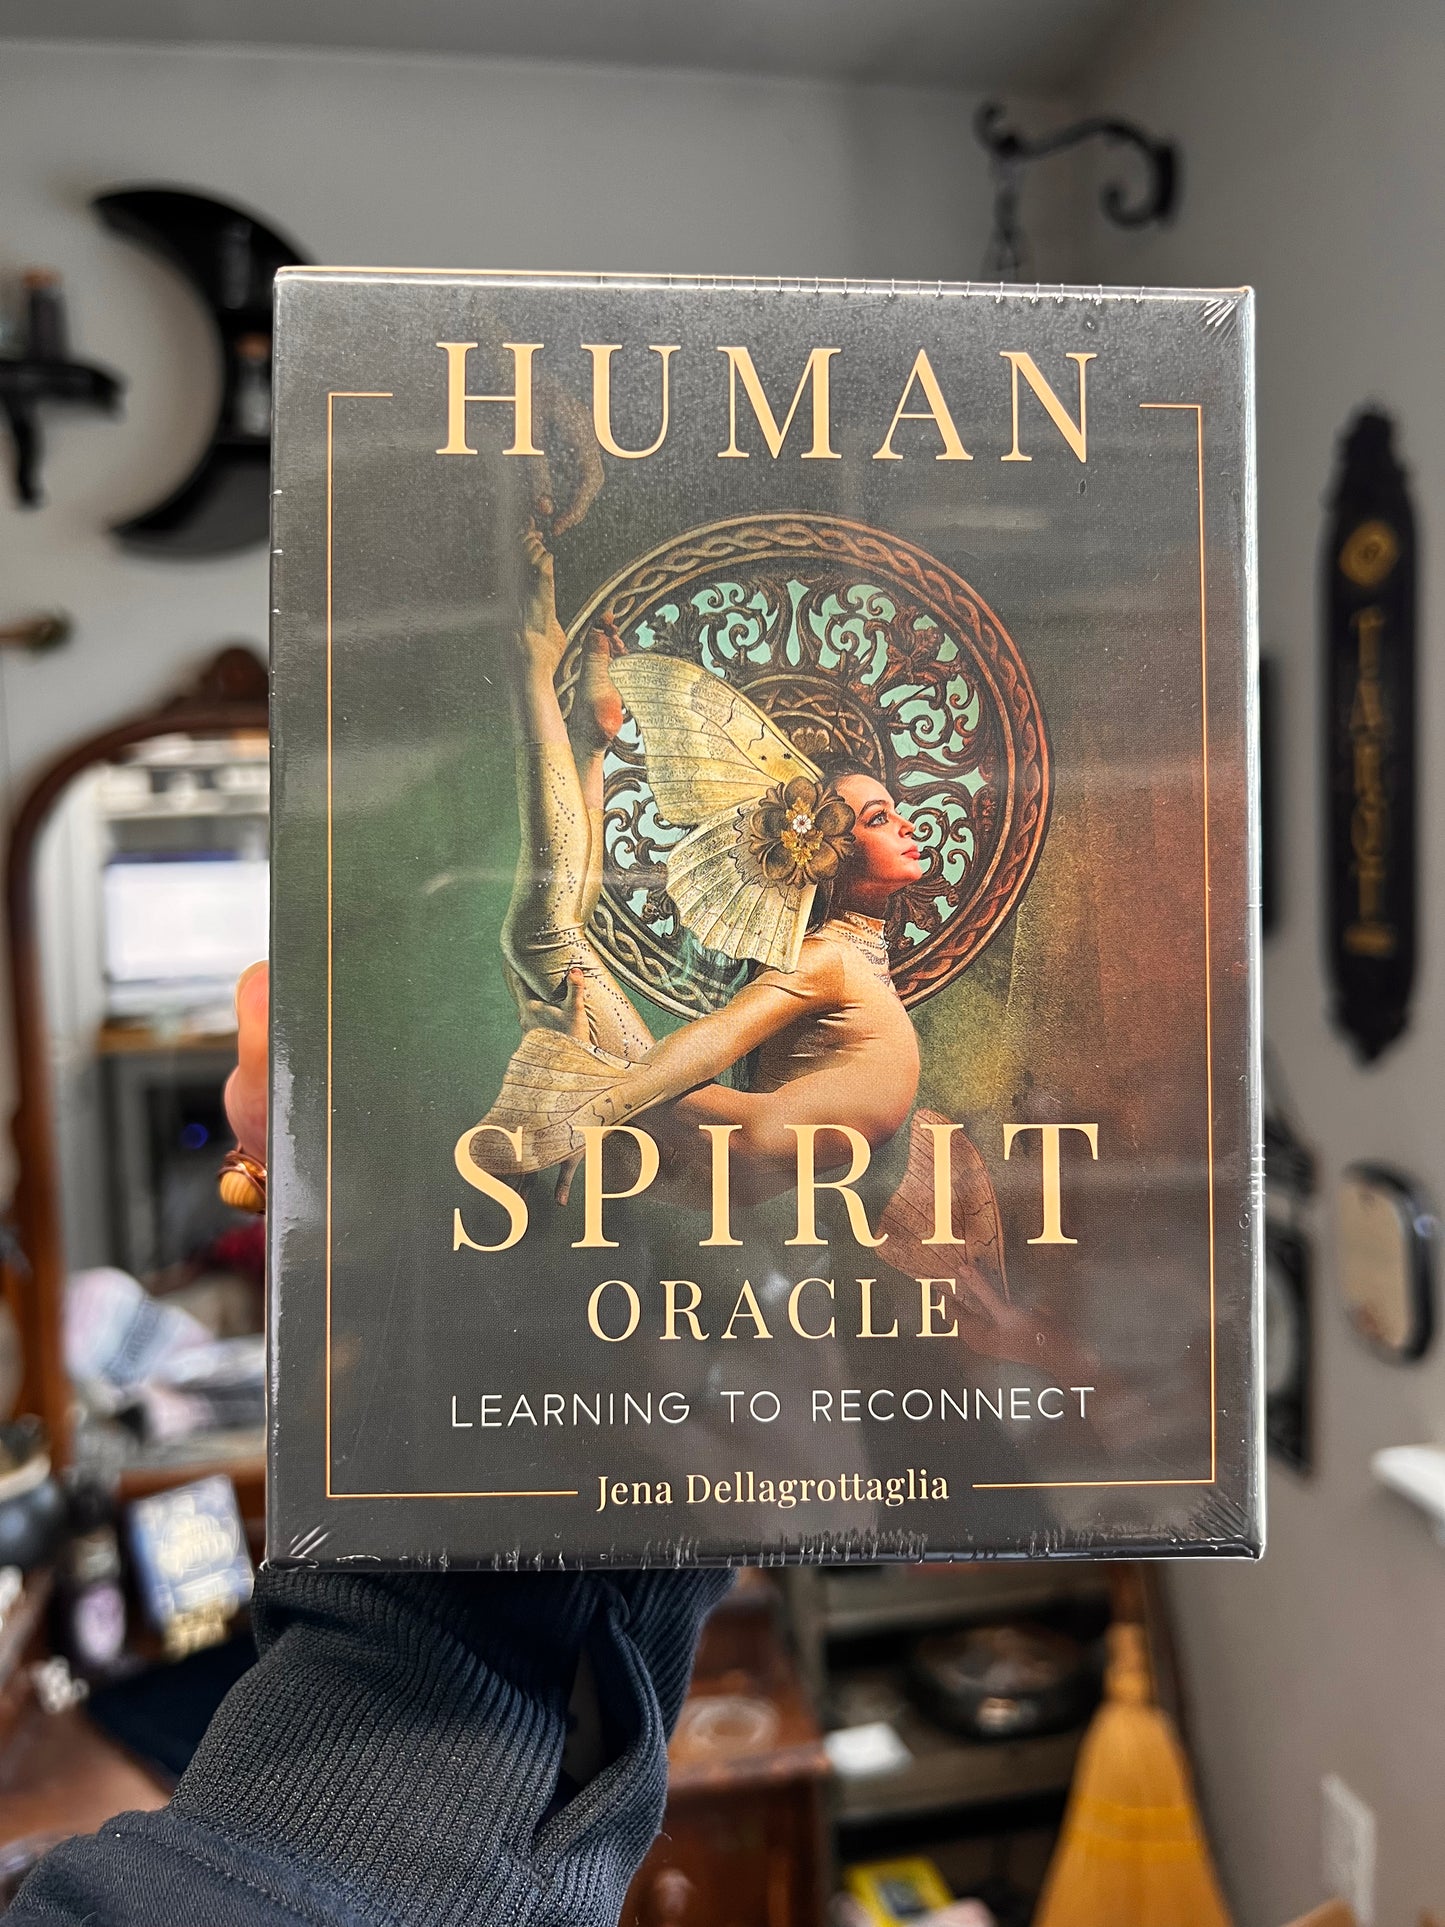 Human Spirit Oracle: Learning to Reconnect (44 Gilded Cards with 128 Full-Color Guidebook